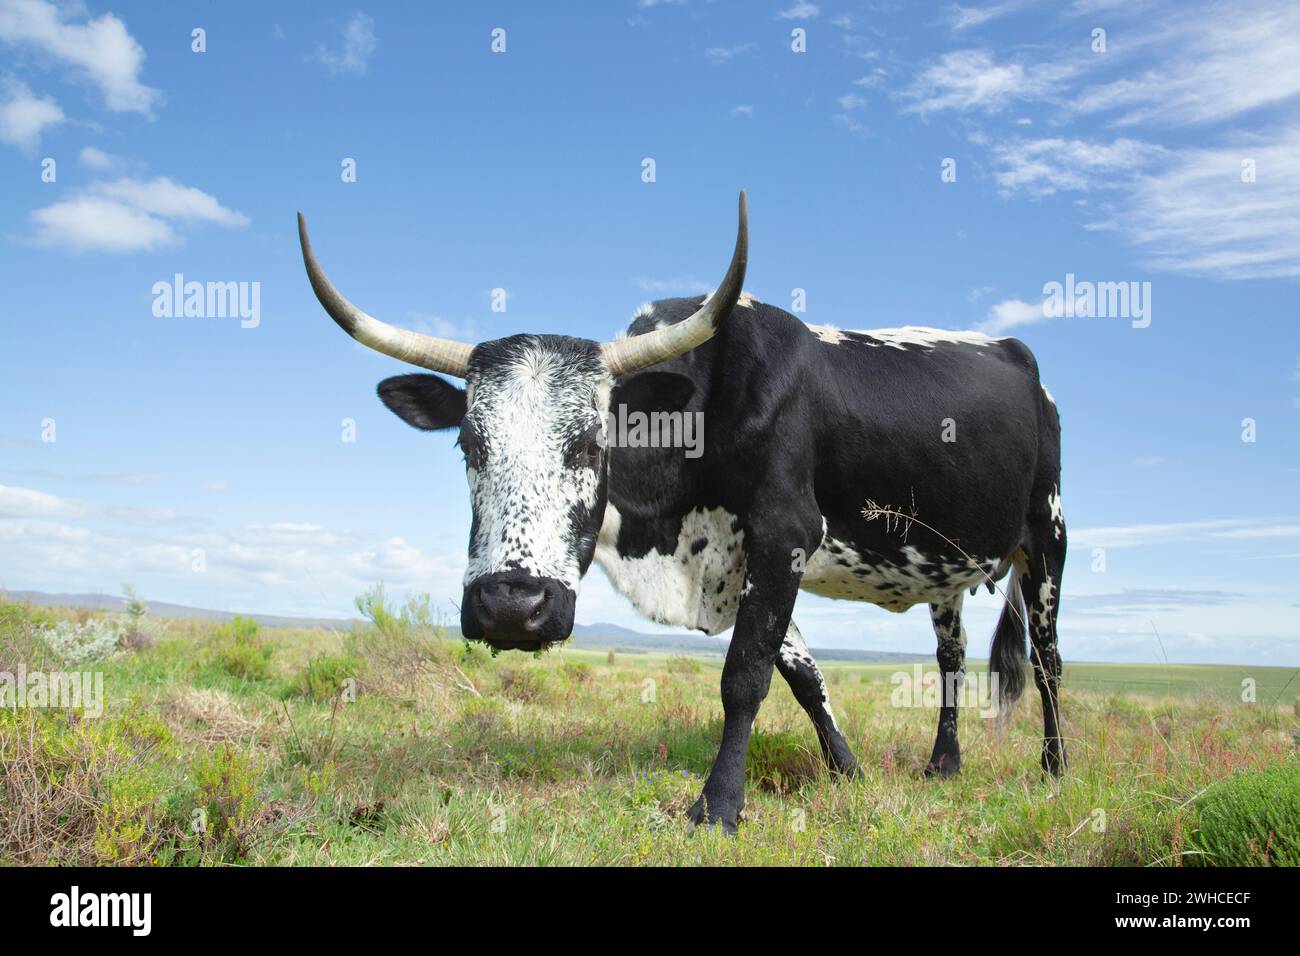 Nguni, South Africa, Western Cape Province, Overstrand, cow, cattle, domestic animal, agriculture, farm, cattle breed indigenous to Southern Africa Stock Photo